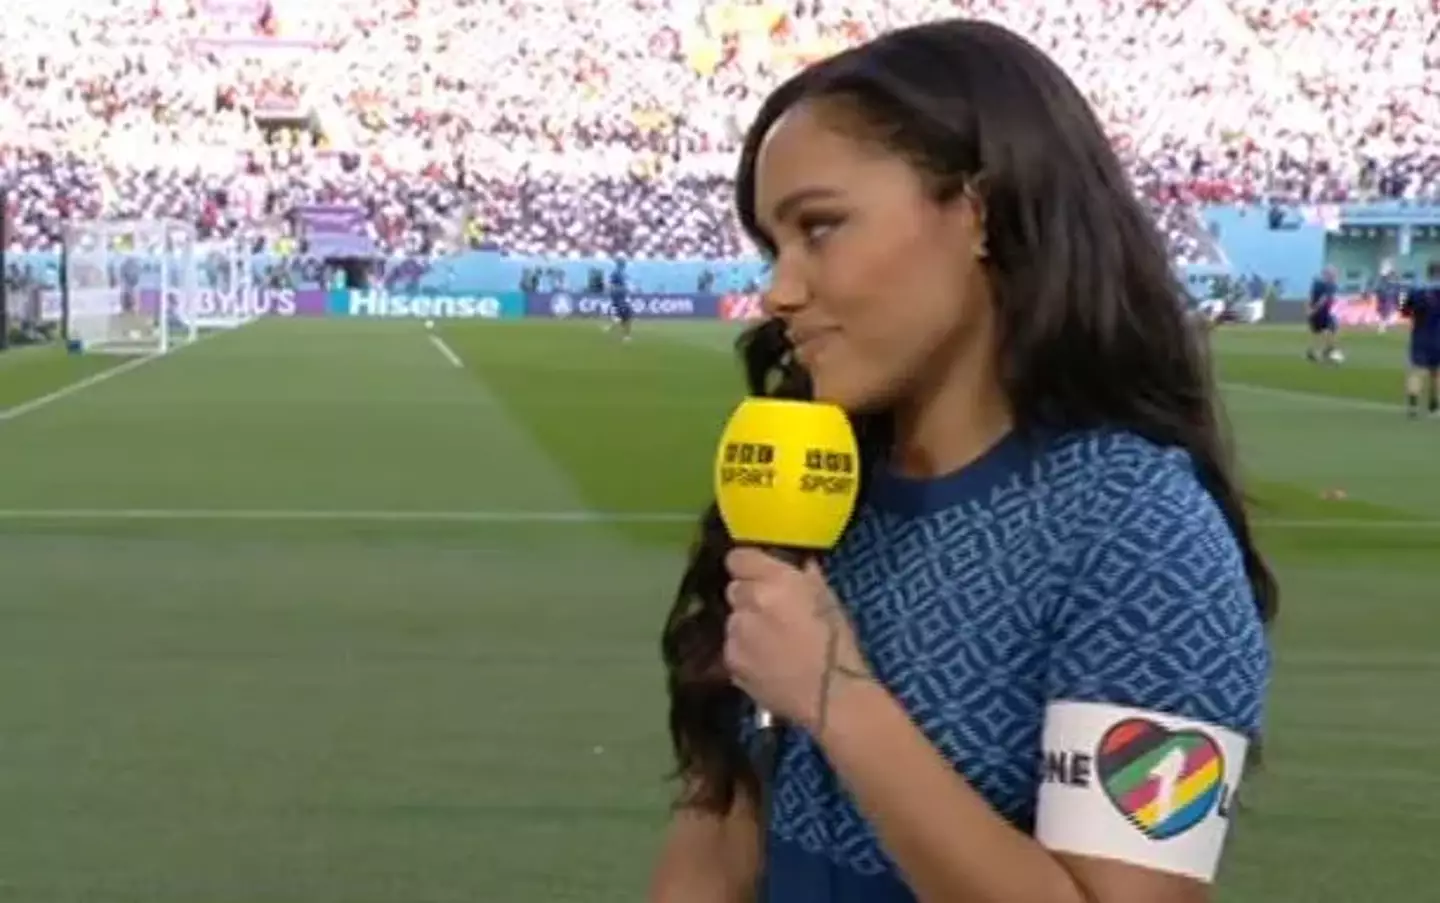 Alex Scott also made a stand after FIFA banned players wearing armbands supporting LGBT+ people during the recent World Cup.